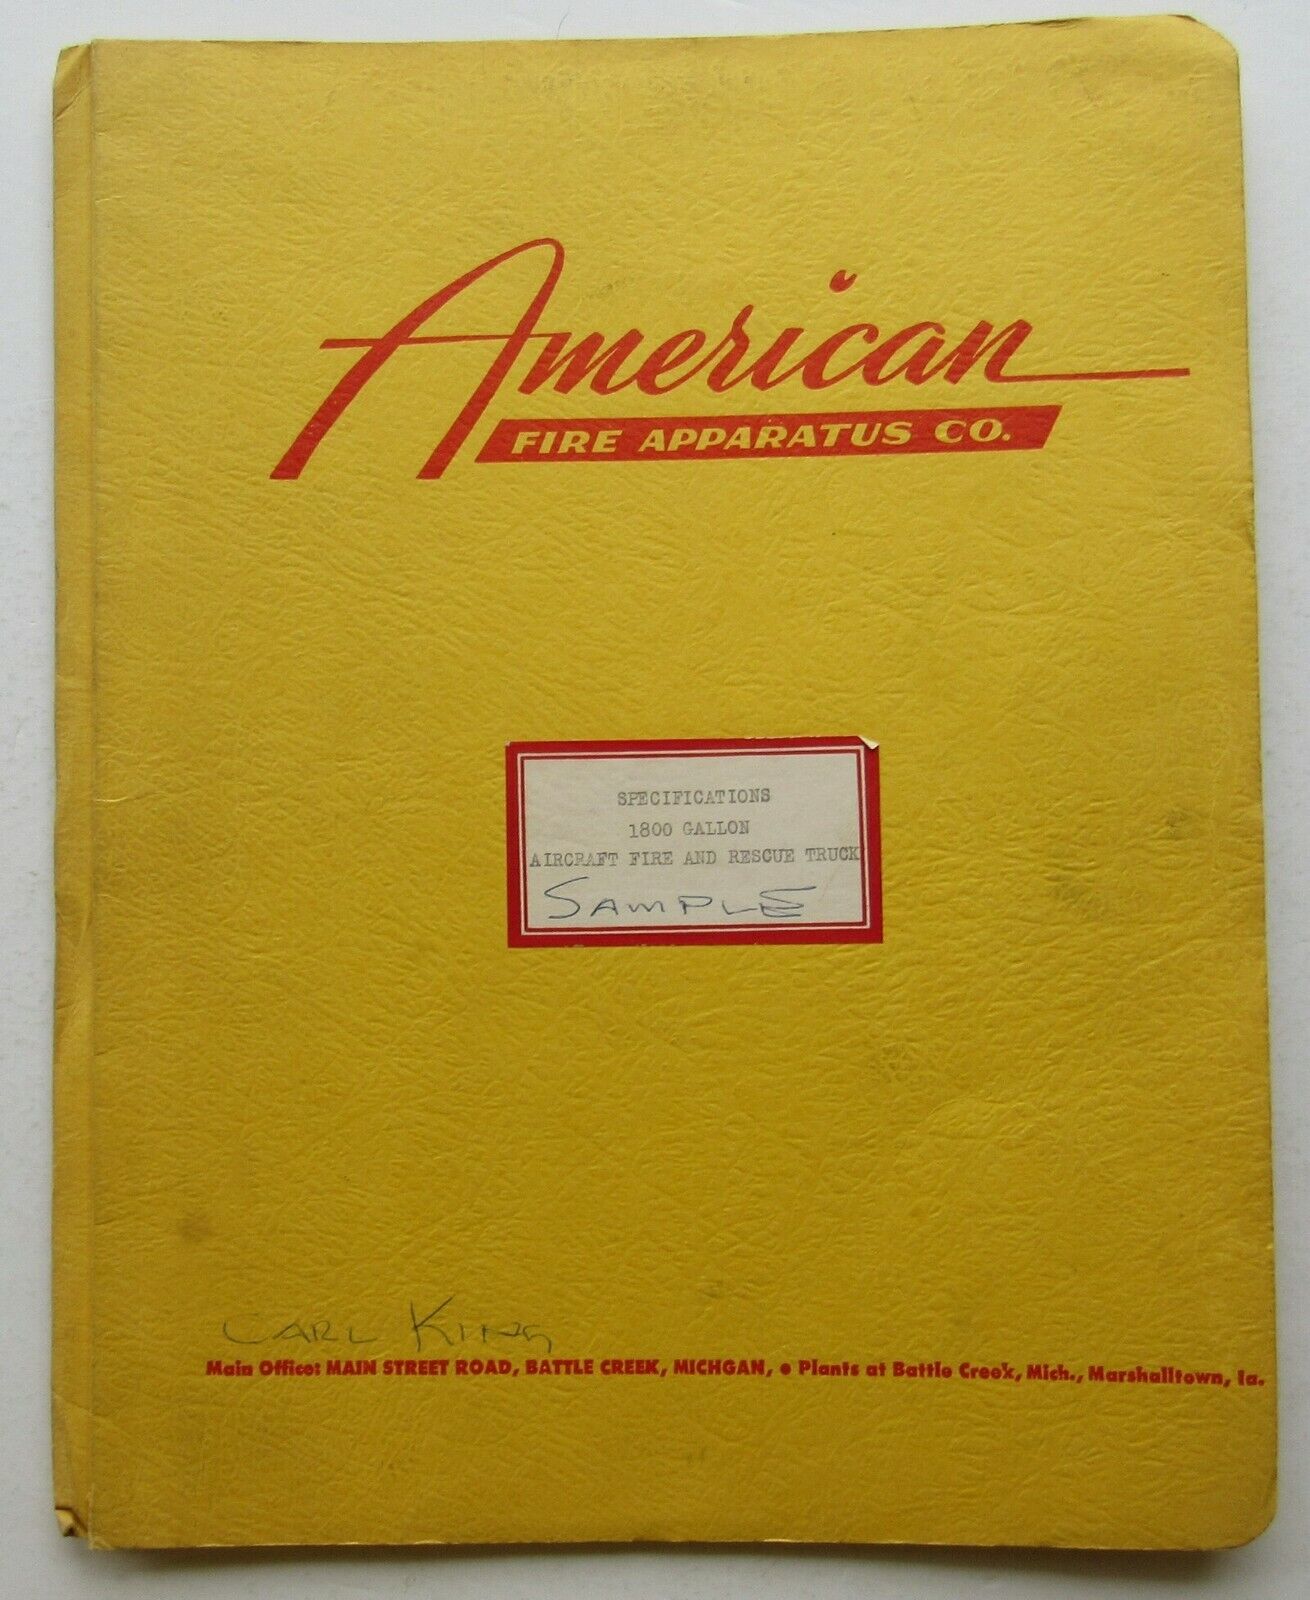 American Fire Apparatus Co Specifications 1800 Aircraft Fire & Rescue Truck